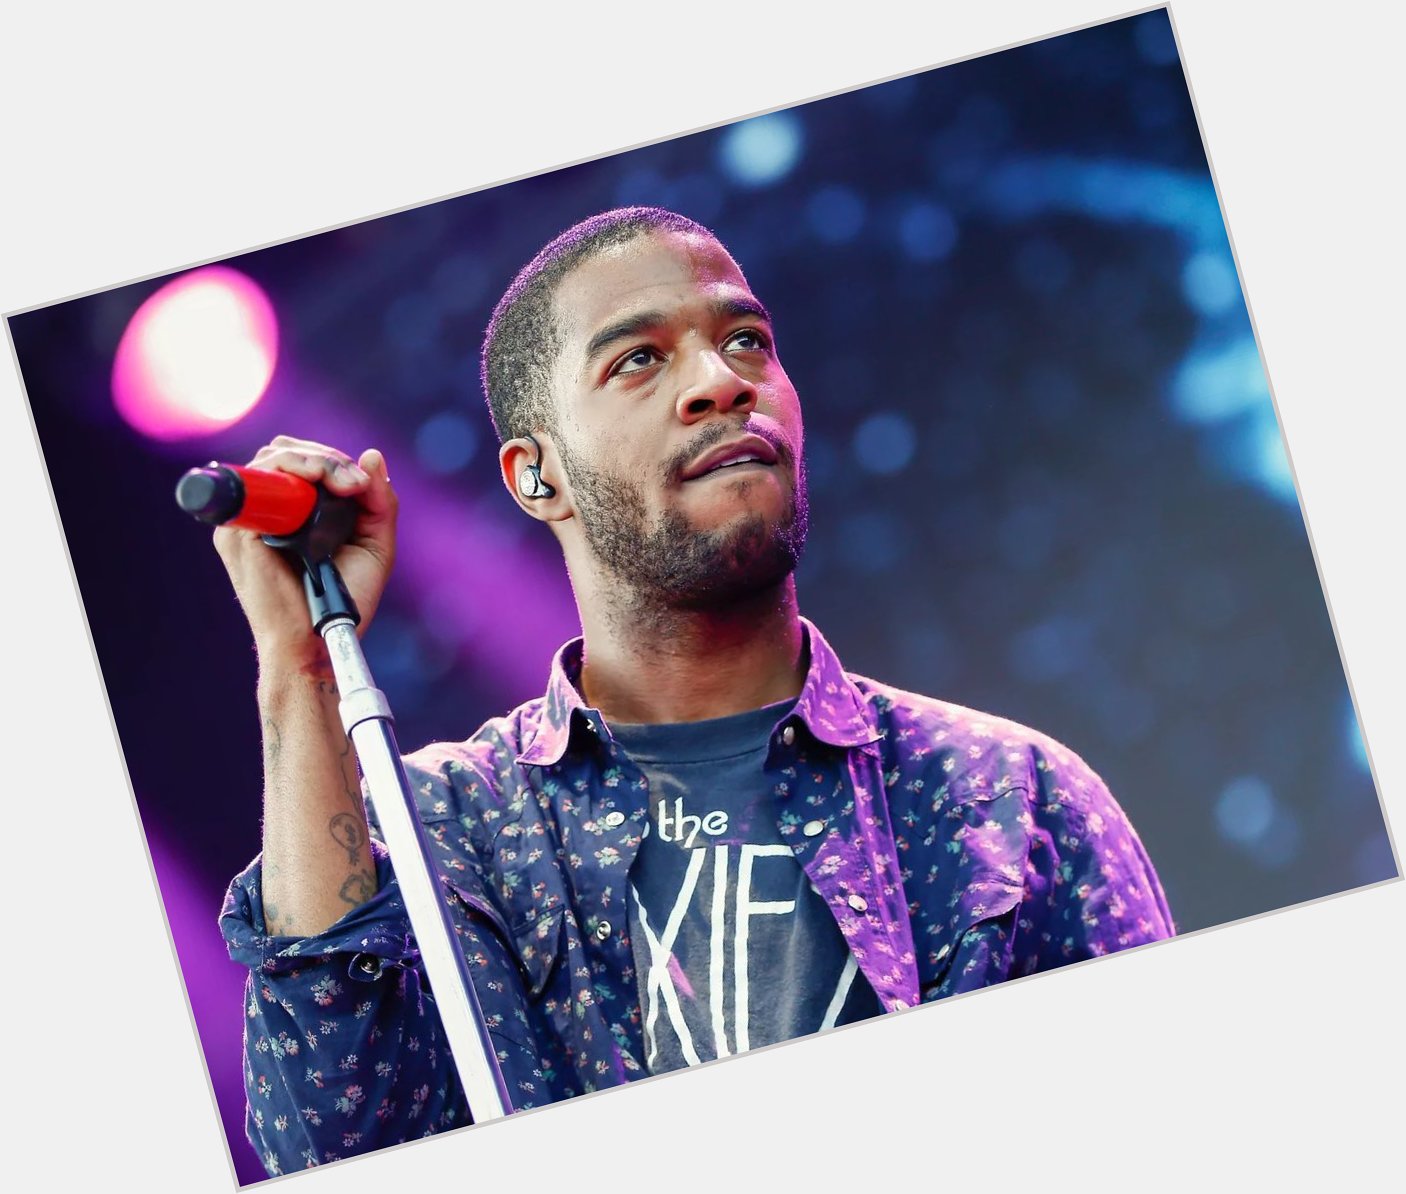 Happy birthday Kid Cudi Today he turns 37 years old to wish Cudi a happy birthday  